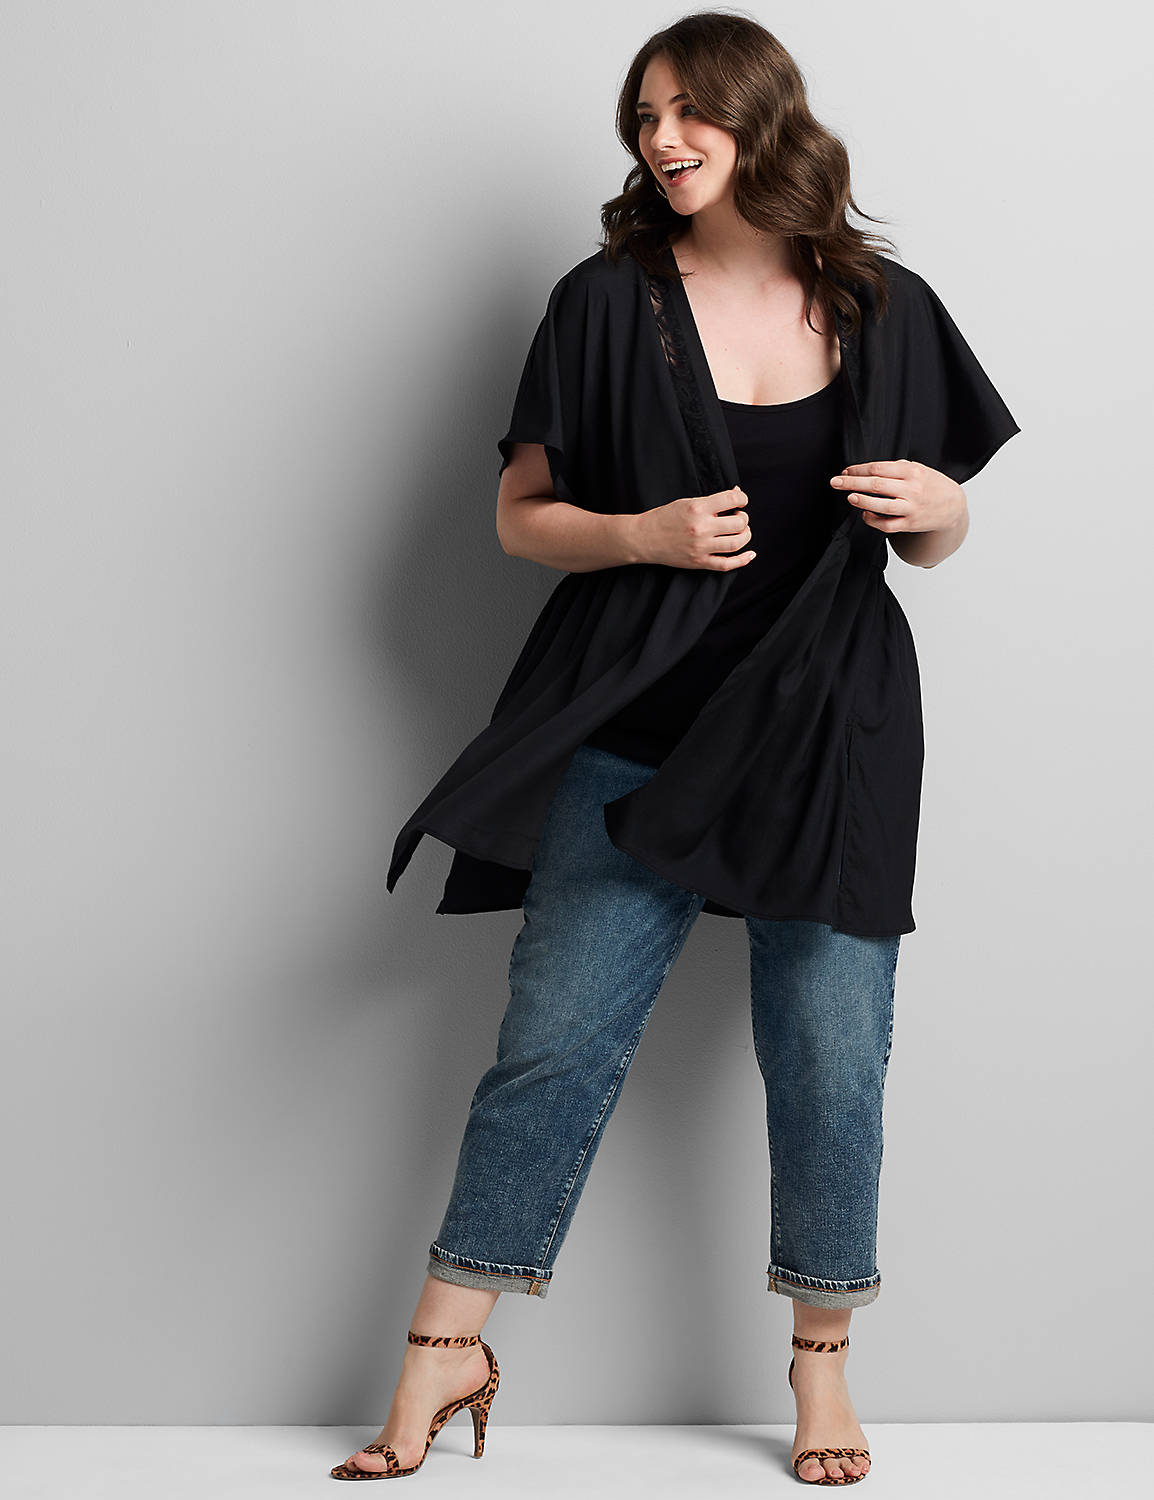 Dolman Sleeve Overpiece Tunic 1114702:Pitch Black LB 1000322:14/16 Product Image 3